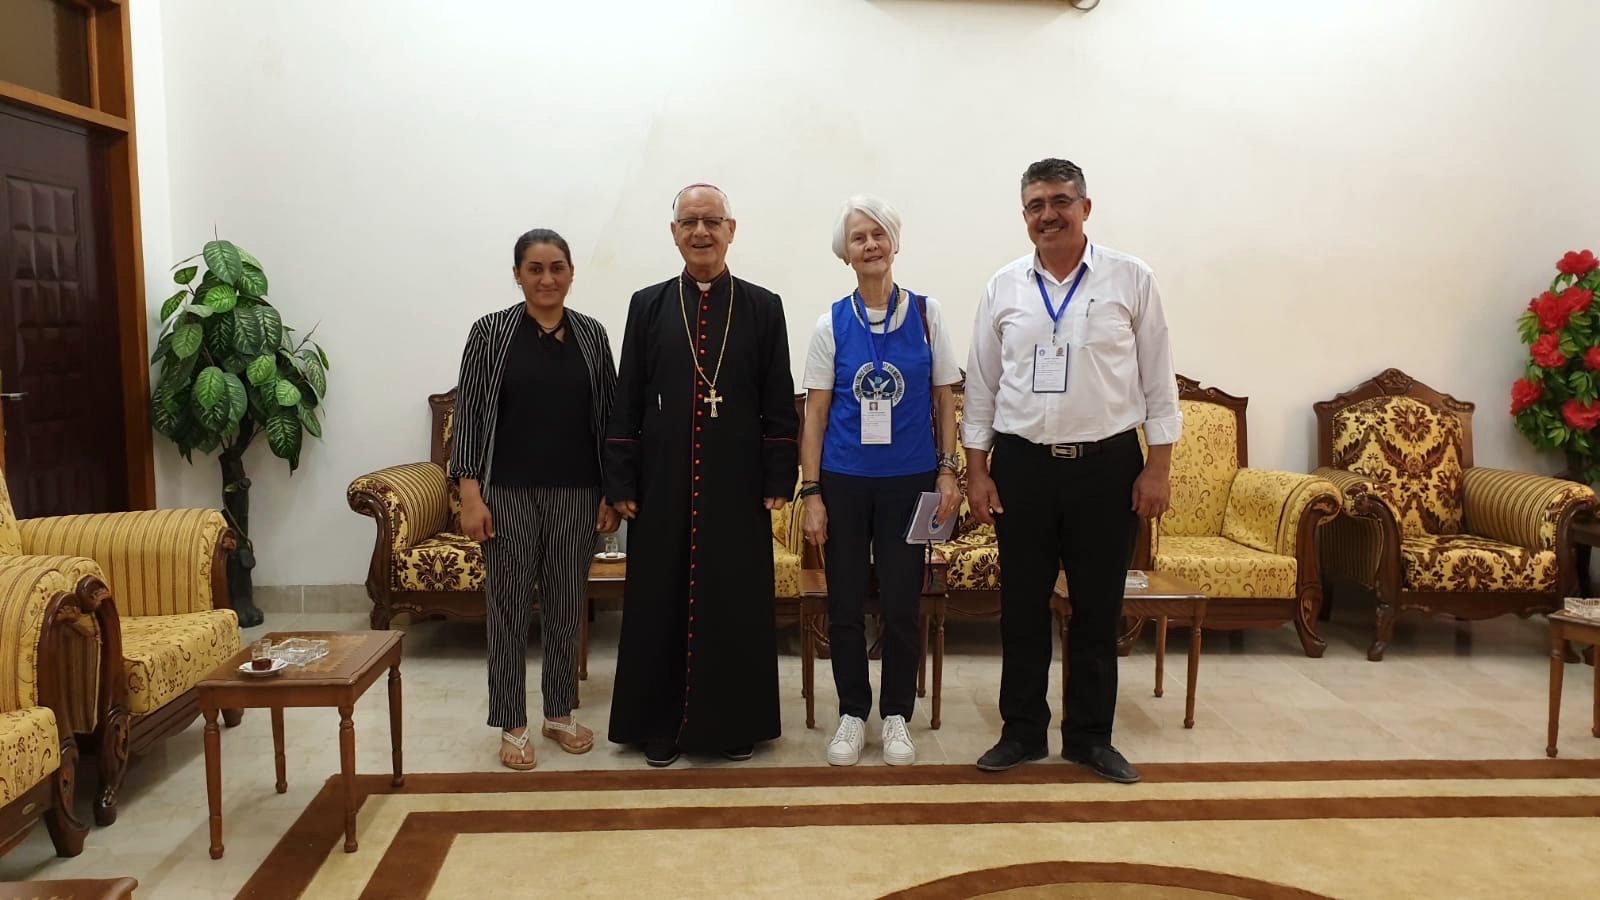 Katrin Bornmüller and Kahlil Al Rasho (the two on the right) paid a visit to the Catholic Bishop of Al Qosh © ISHR